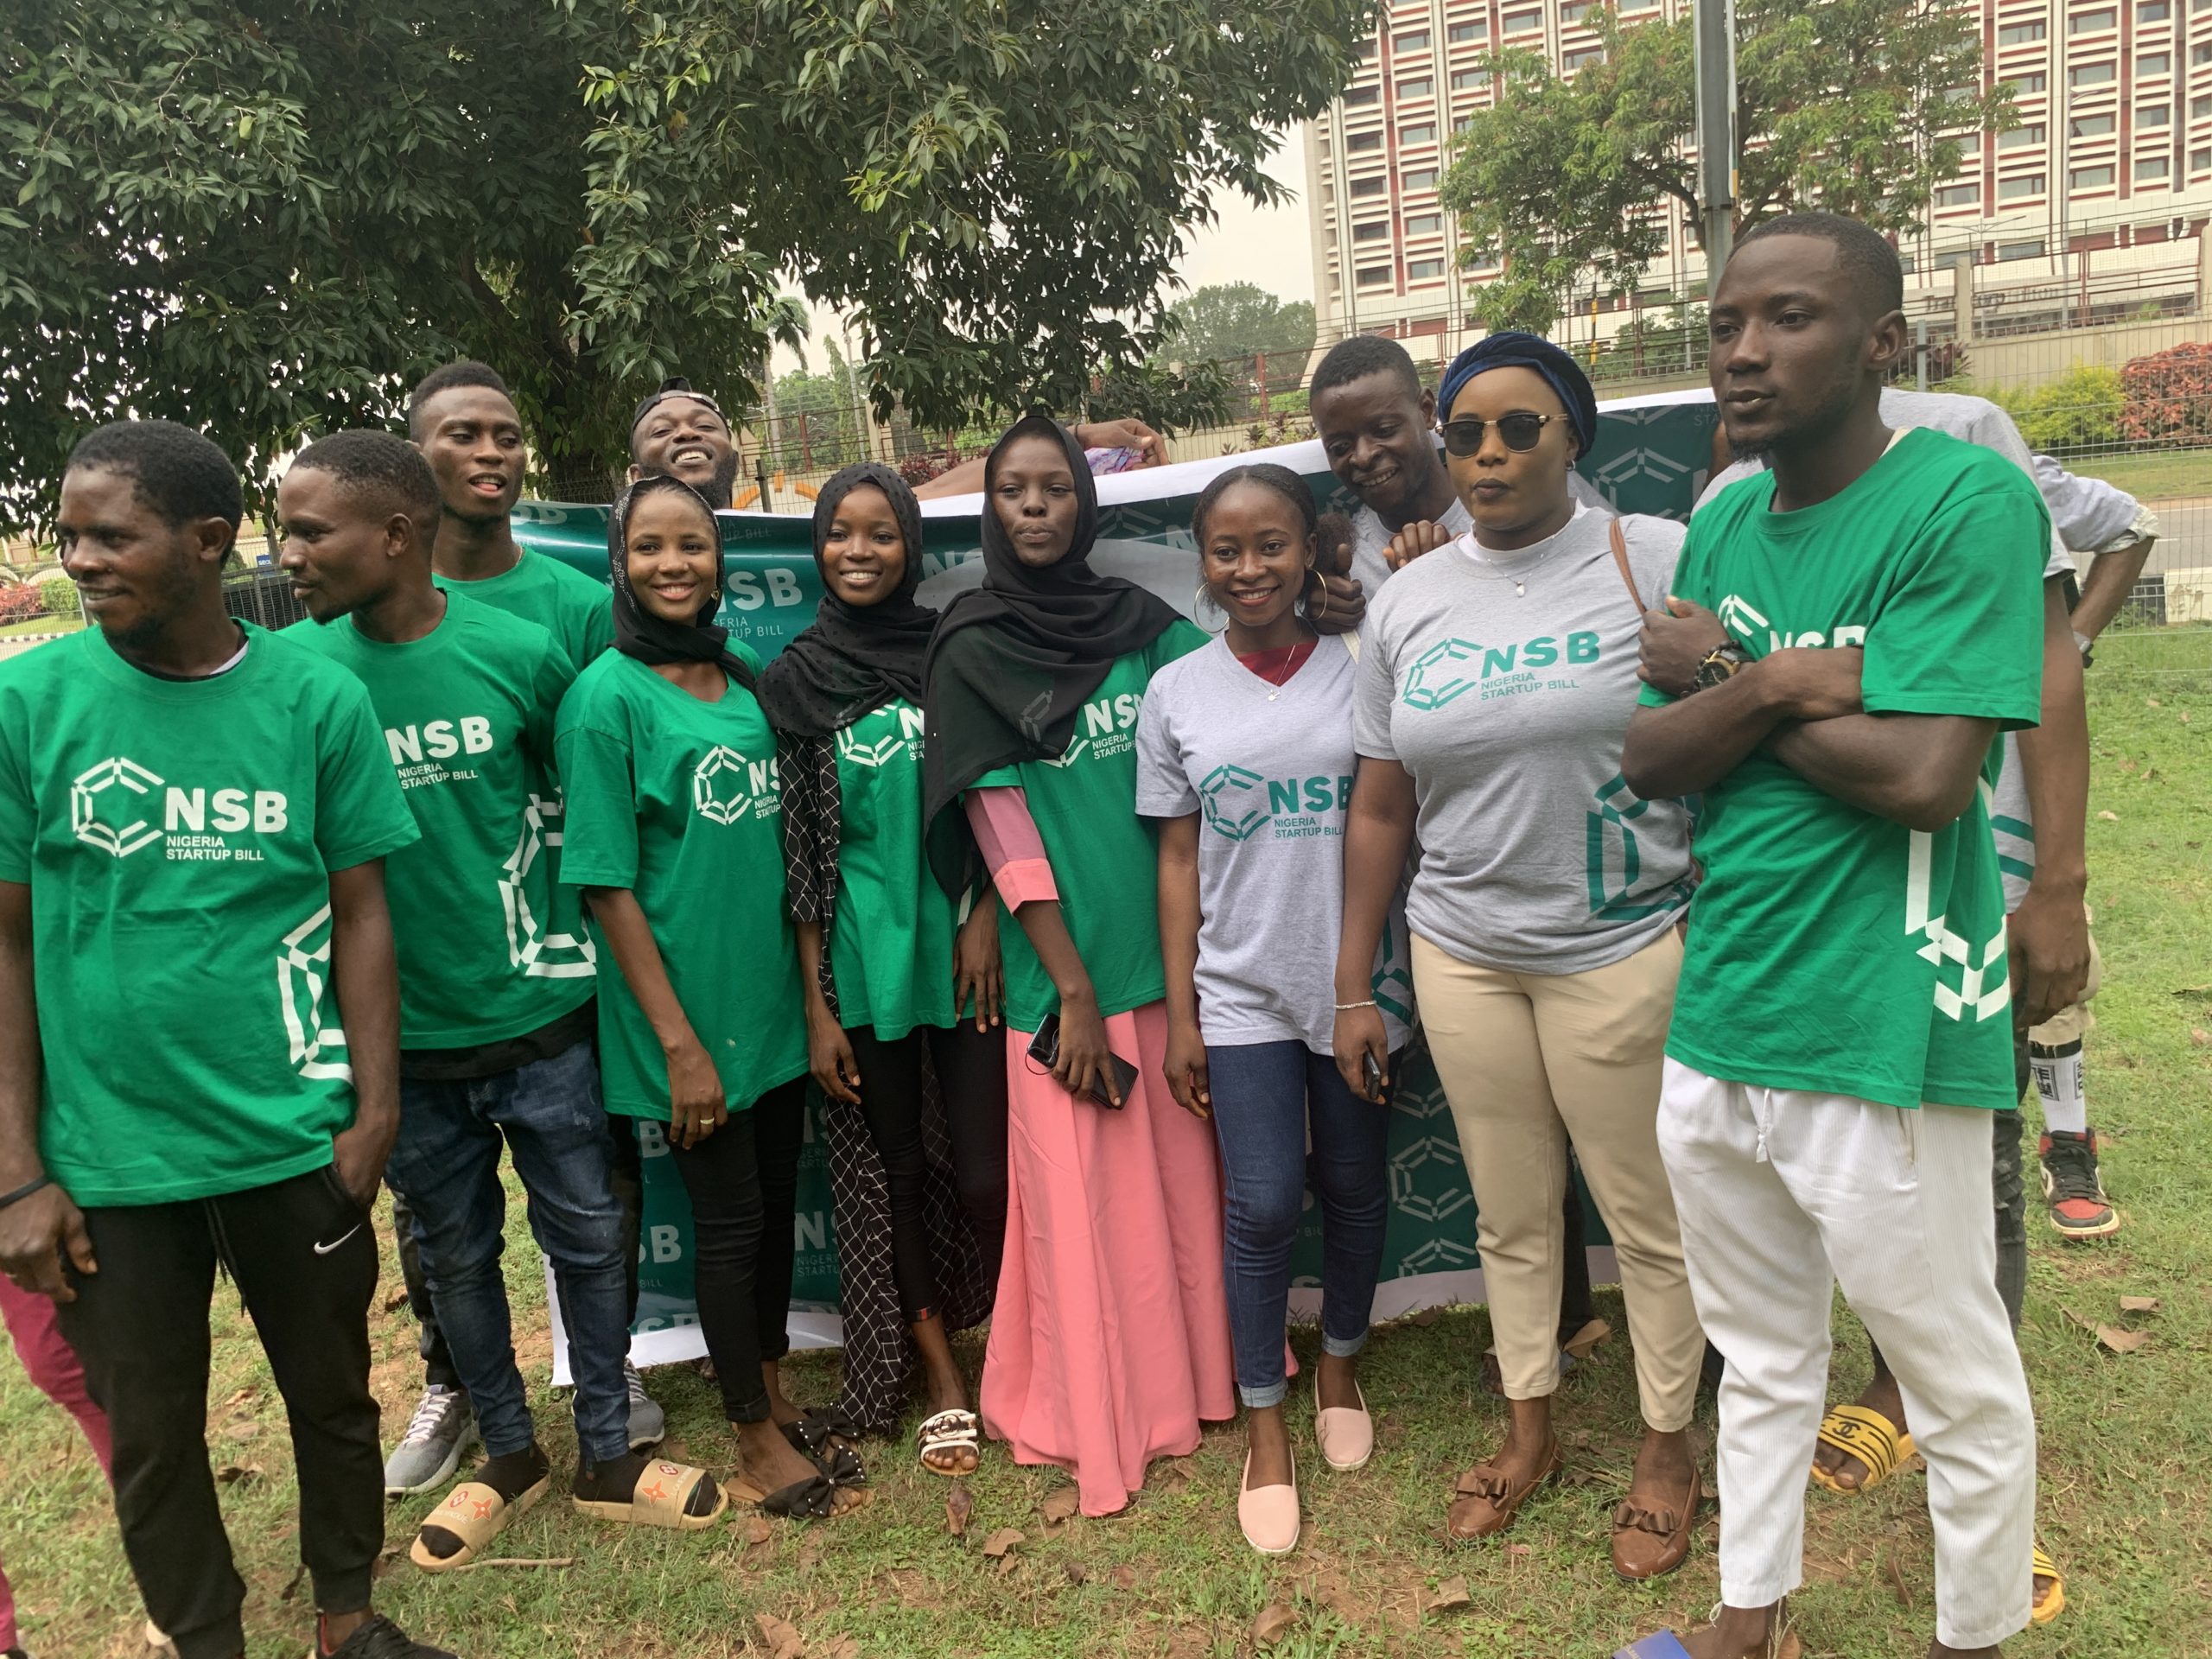 Nigerian youths rallies in support of the Nigeria Startup Bill